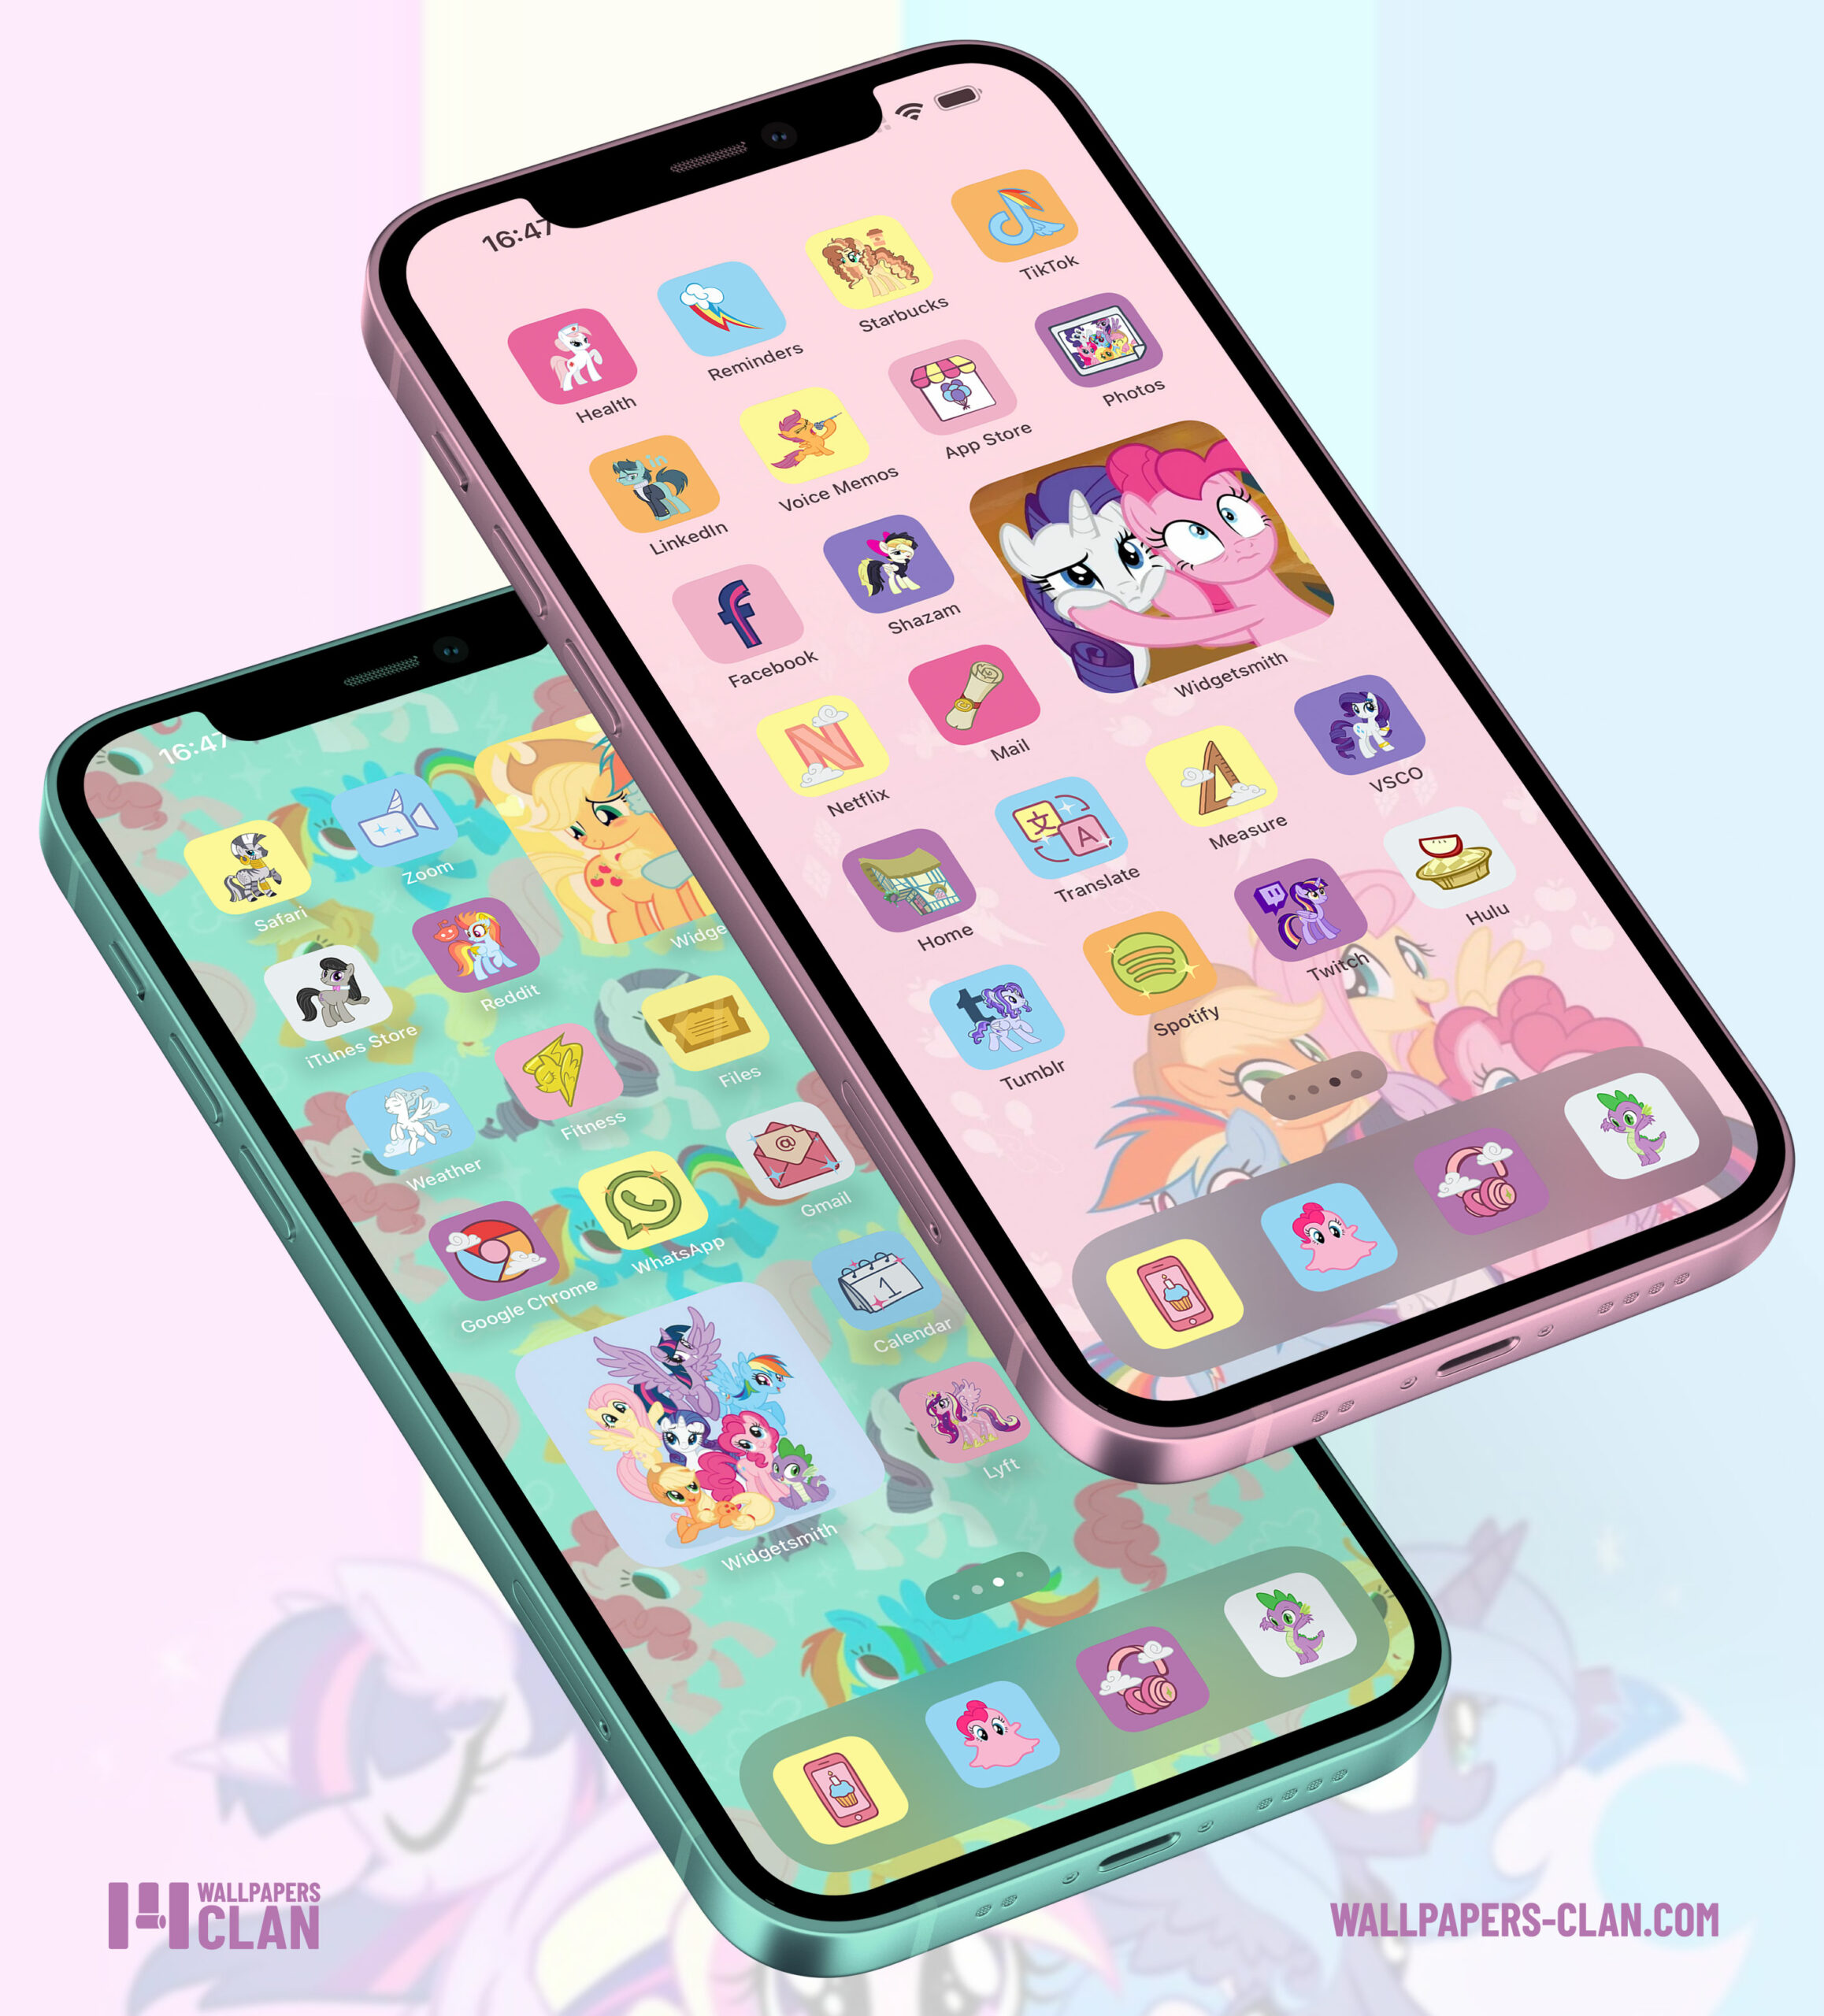 My Little Pony App Icons iOS & Android Free App Icons for iPho